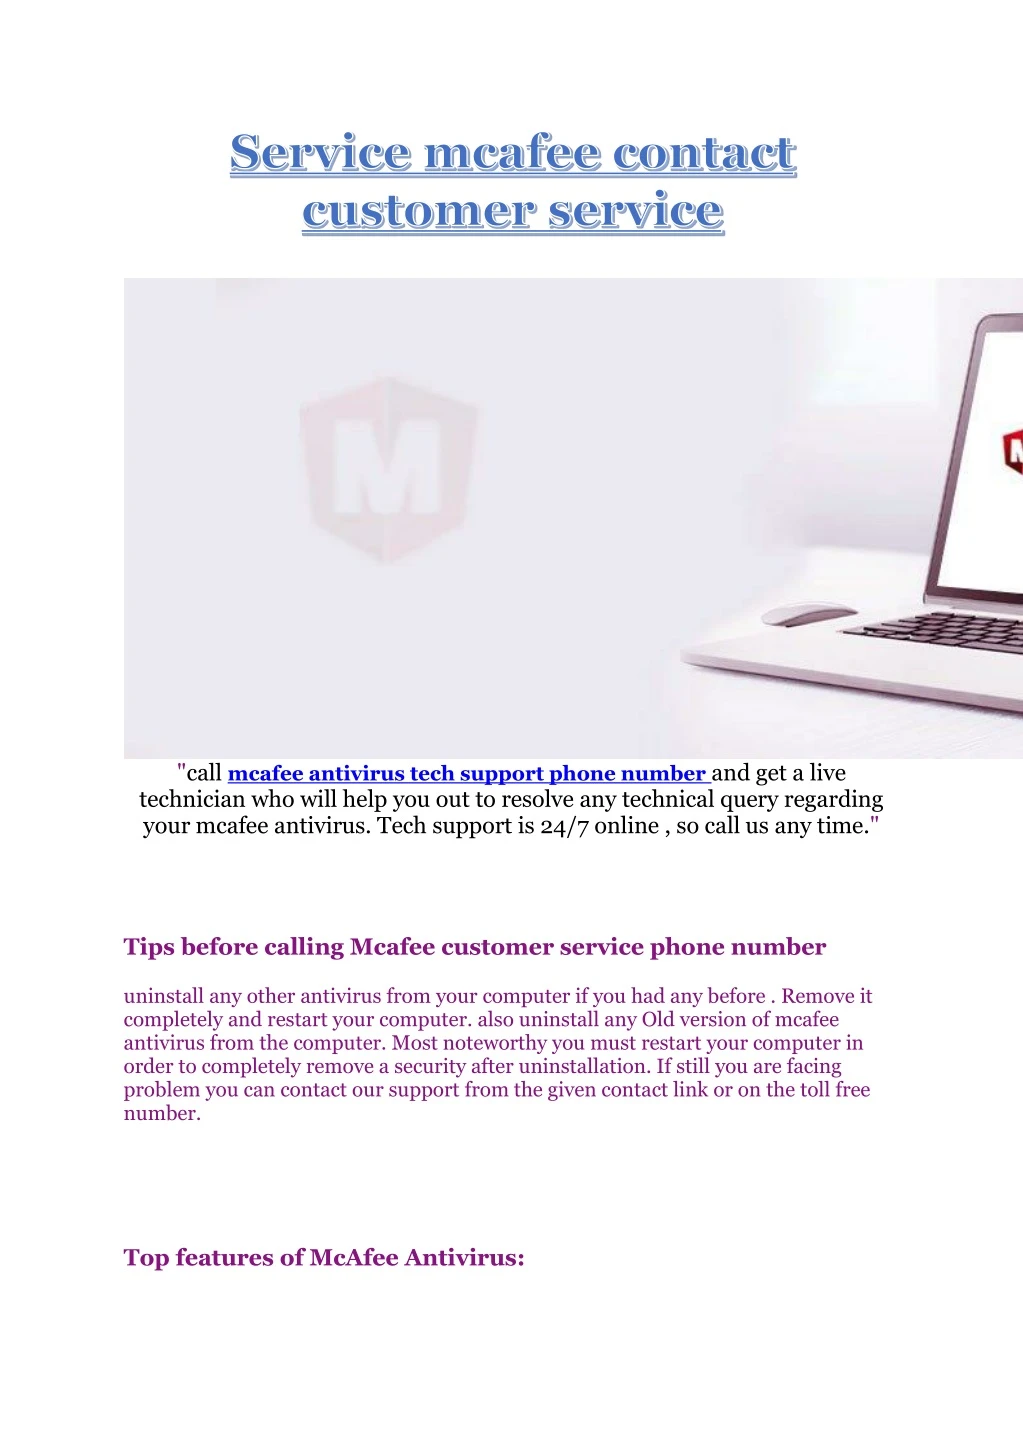 call mcafee antivirus tech support phone number